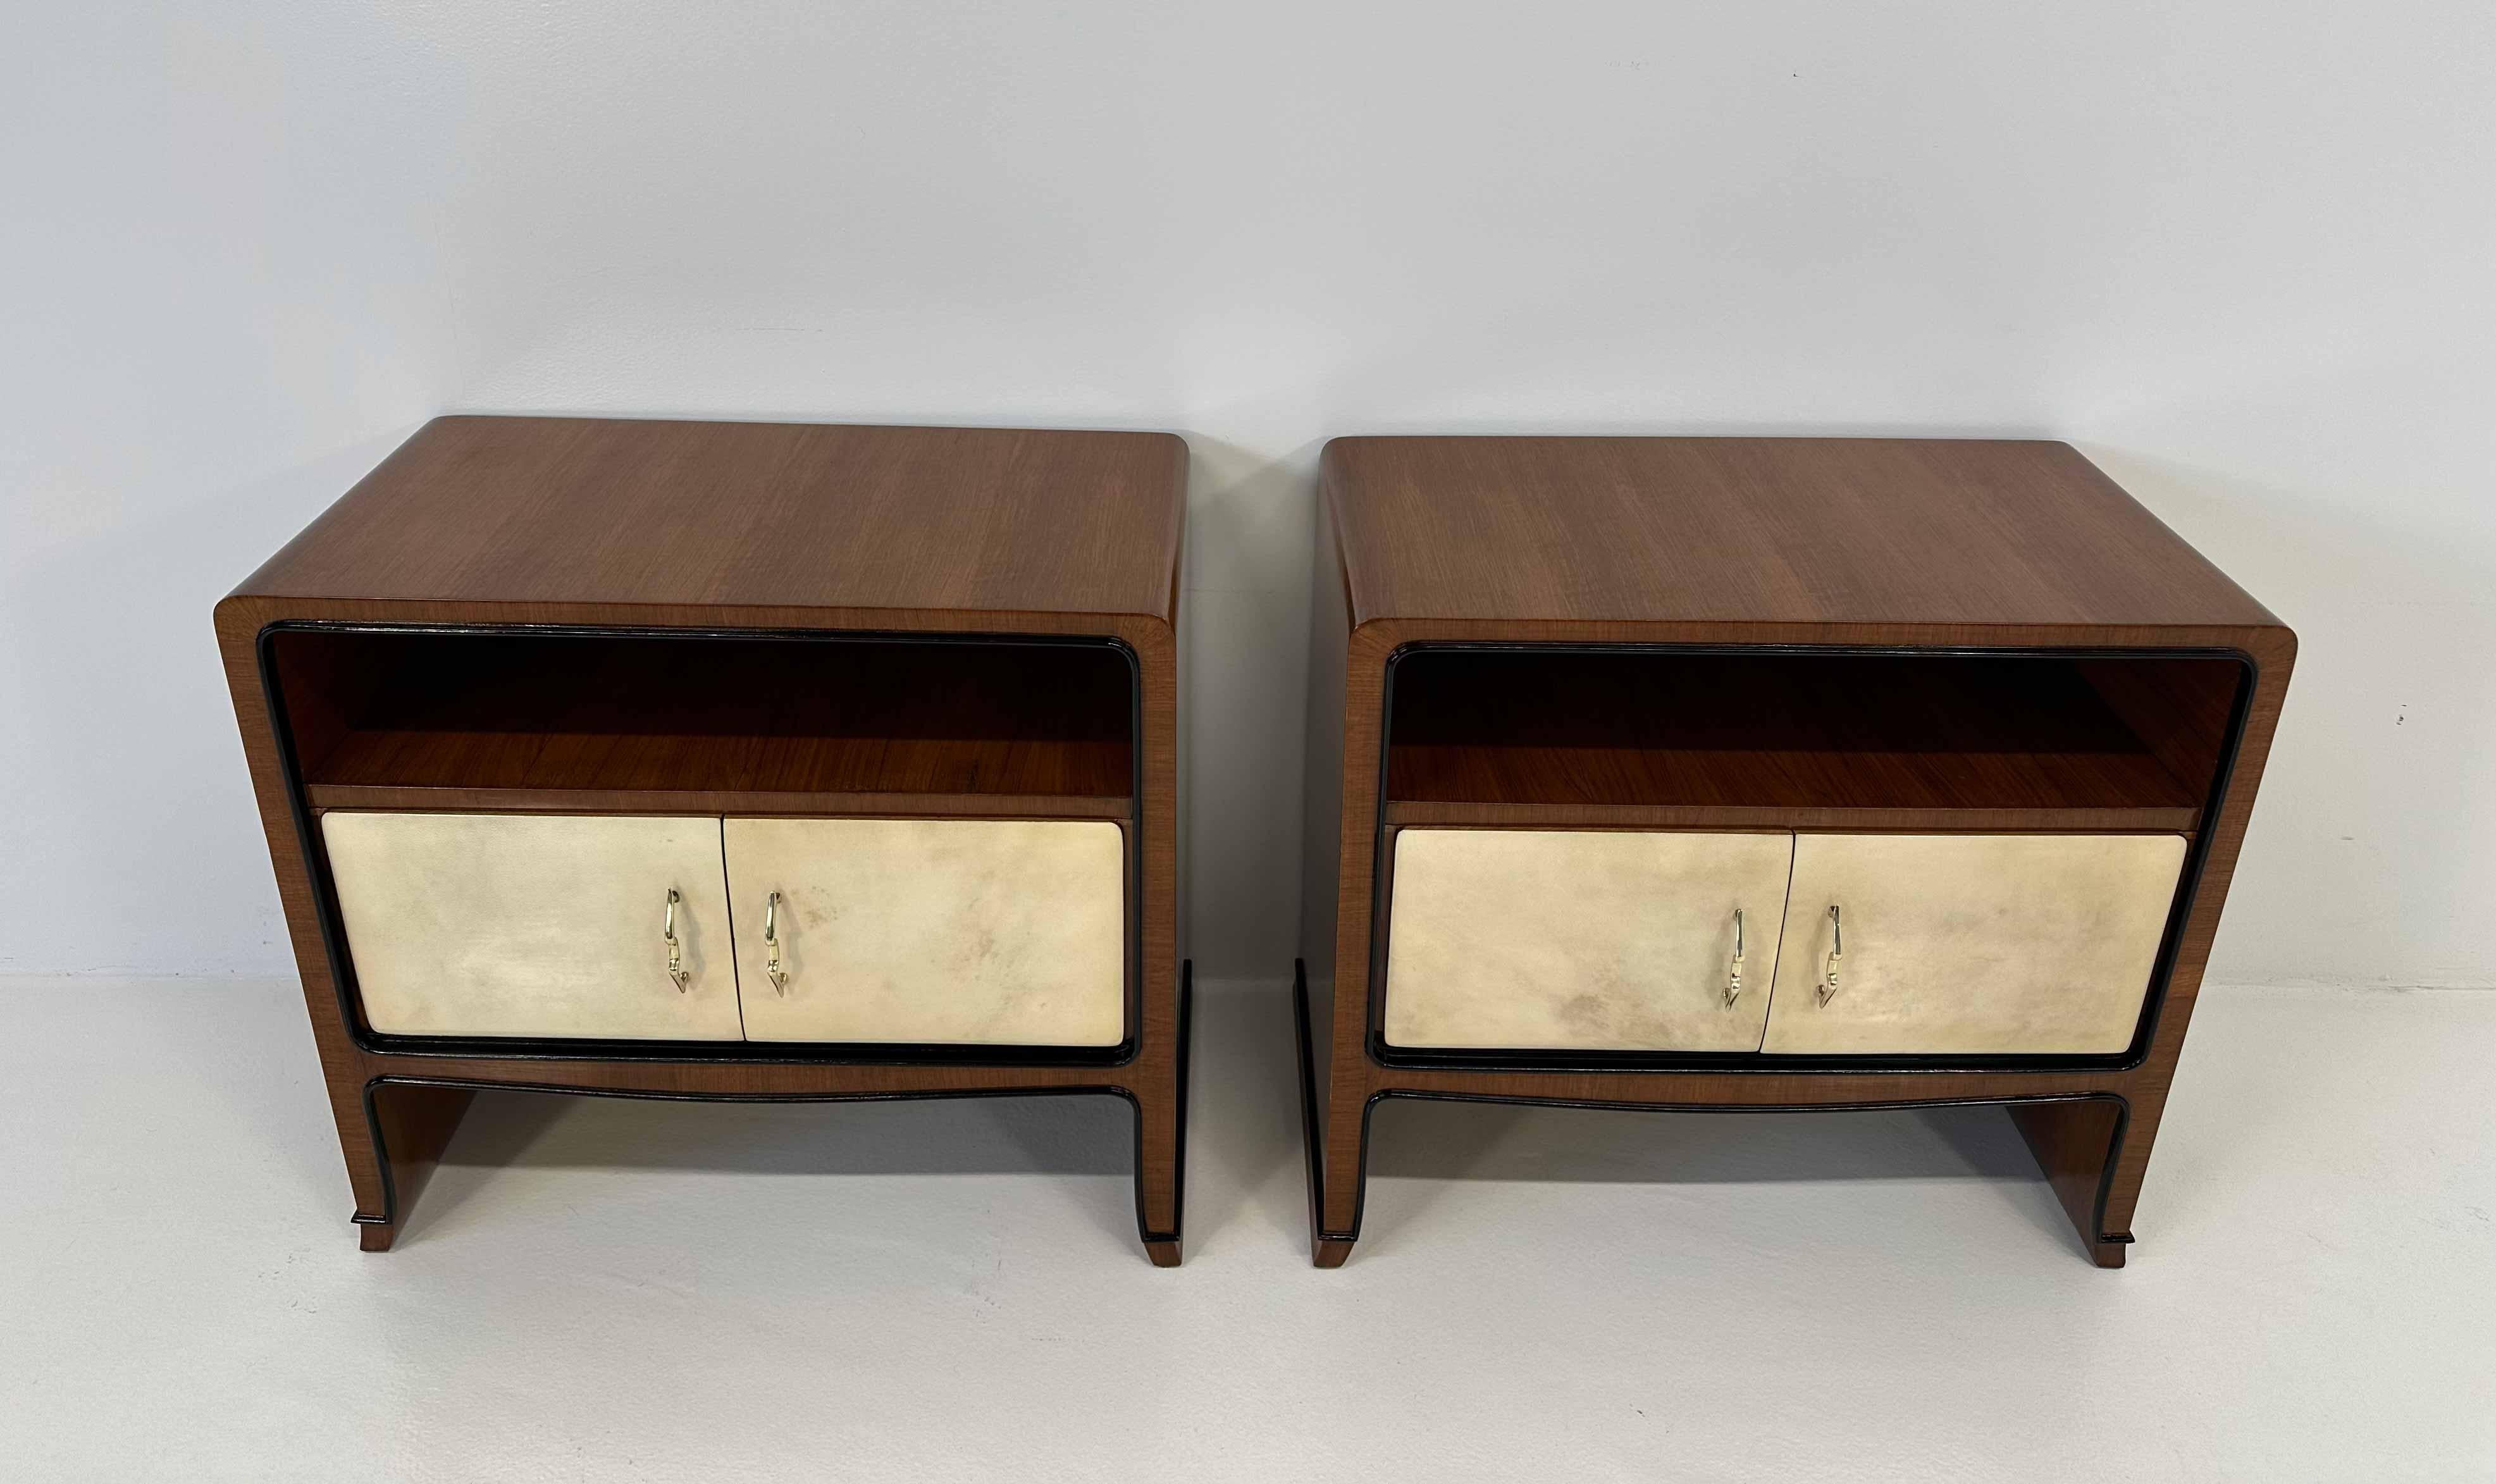 Mid-20th Century Italian Art Deco Parchment and Walnut Paolo Buffa Nightstands, 1940s For Sale